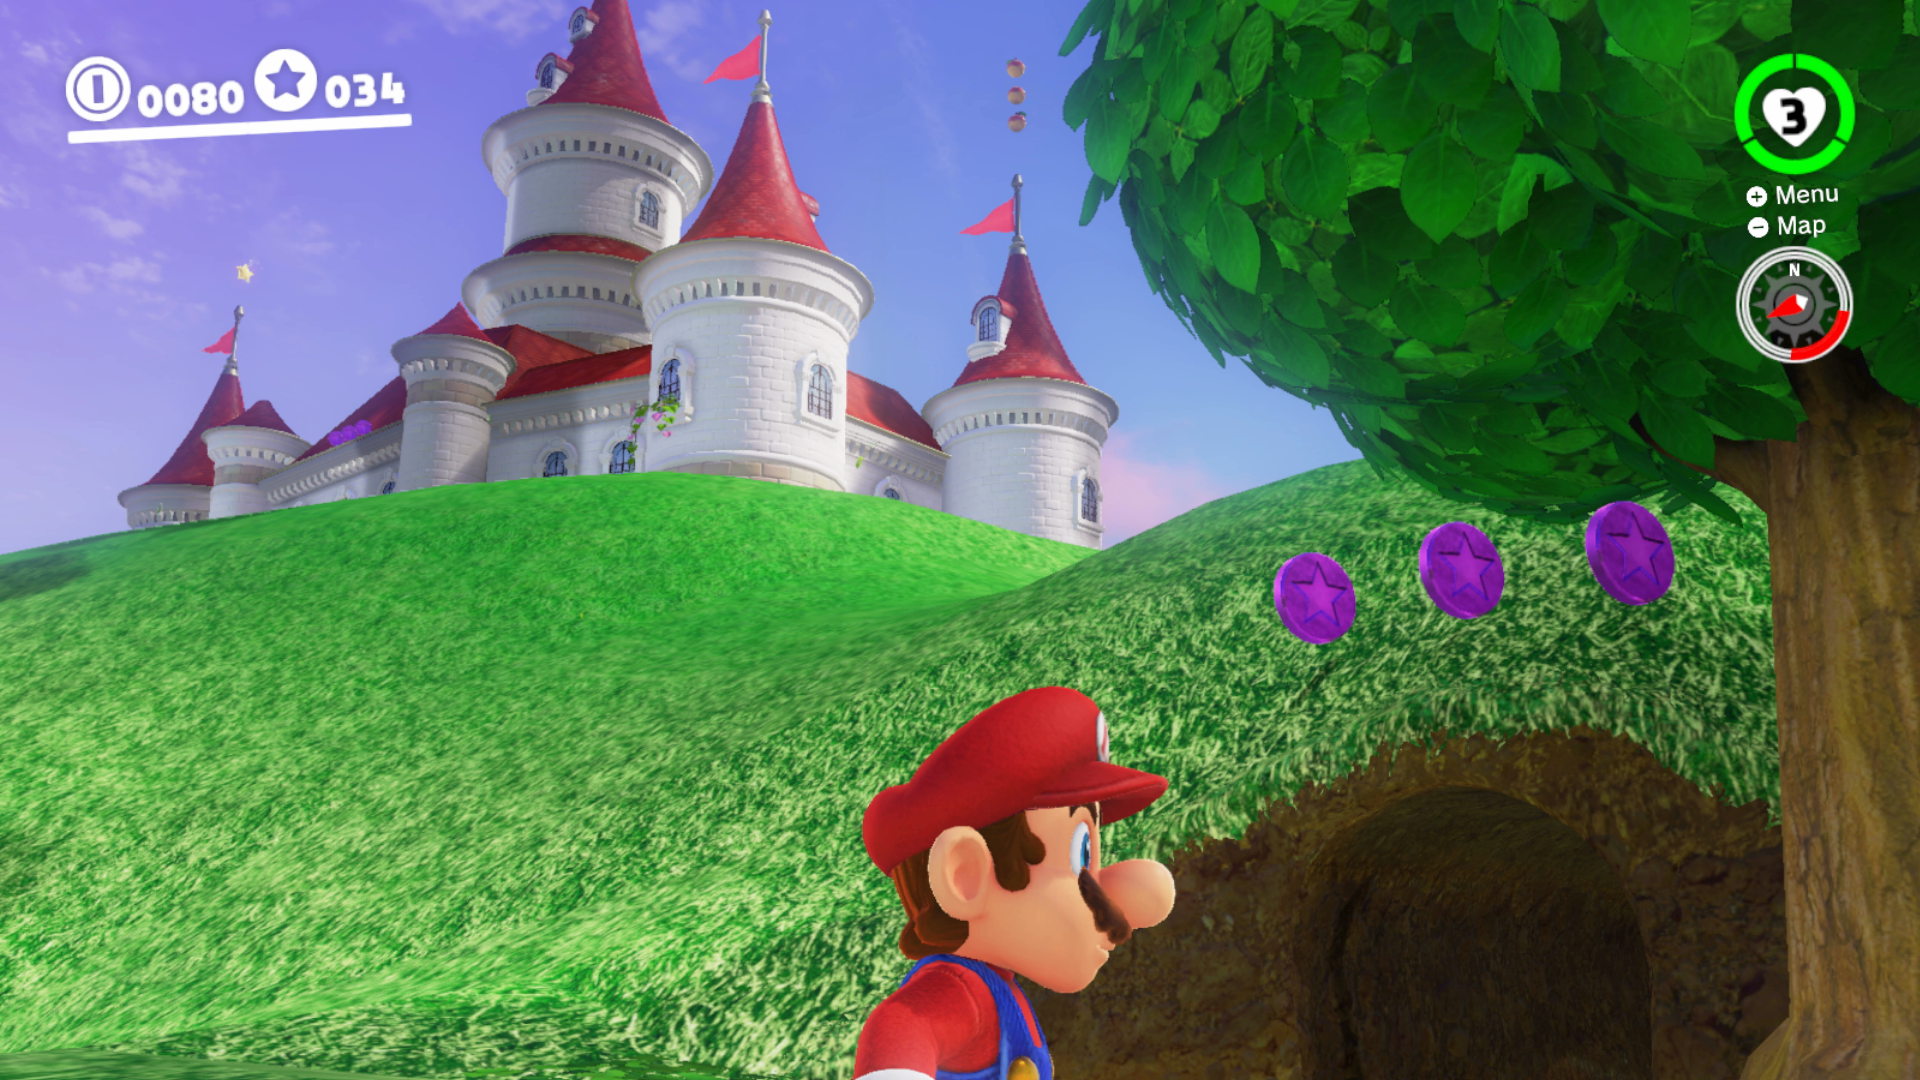 Here's how to find all the purple coins in the Mushroom Kingdom